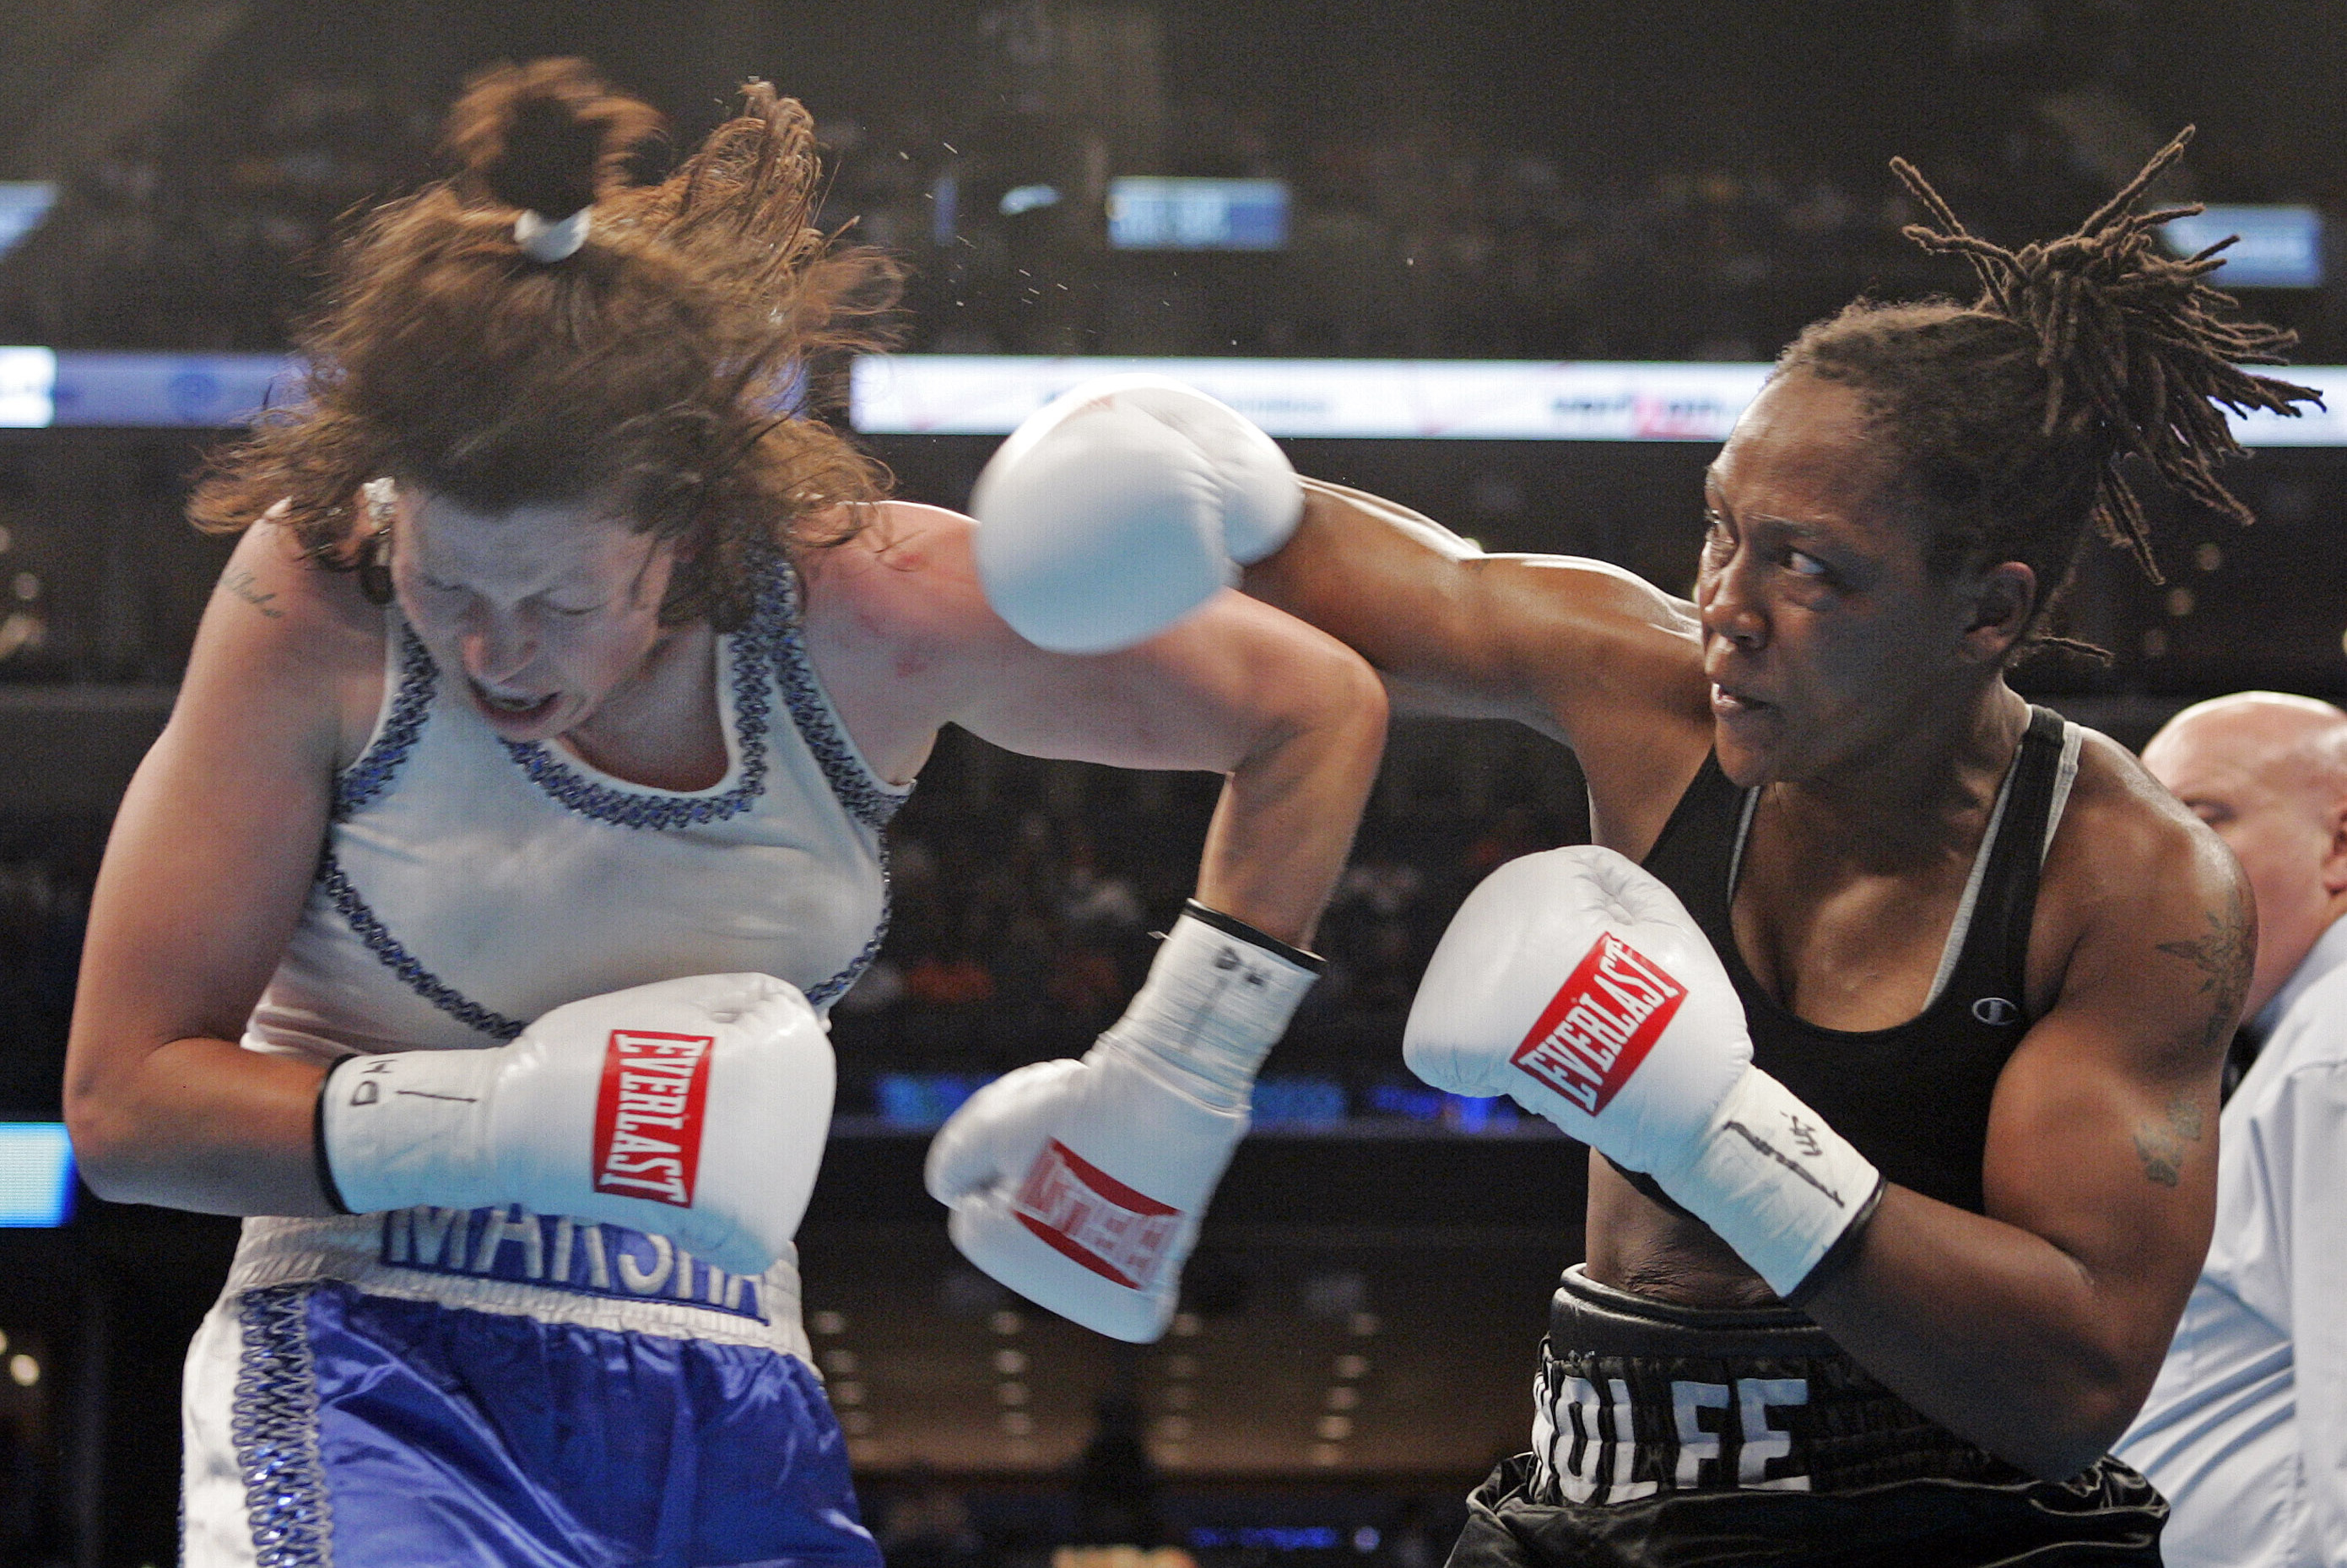 Women's Boxing Champion Ann Wolfe 'I'd F*** Ronda Rousey Up